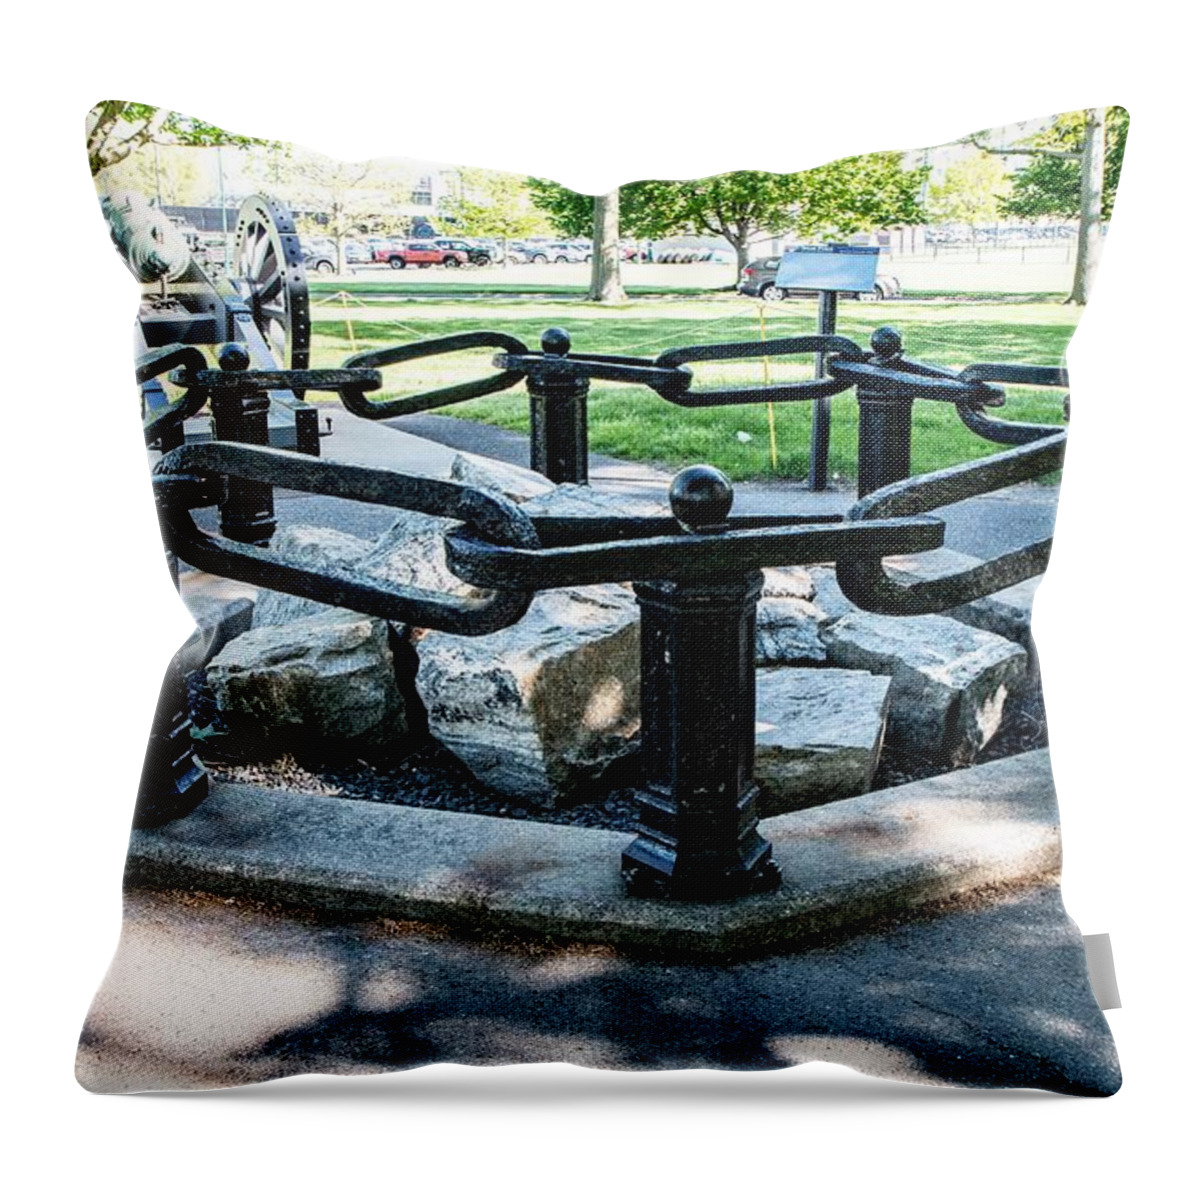 This Is A Photo Of The Great Chain Display At The West Point Military Academy Throw Pillow featuring the photograph The Great Chain by Bill Rogers